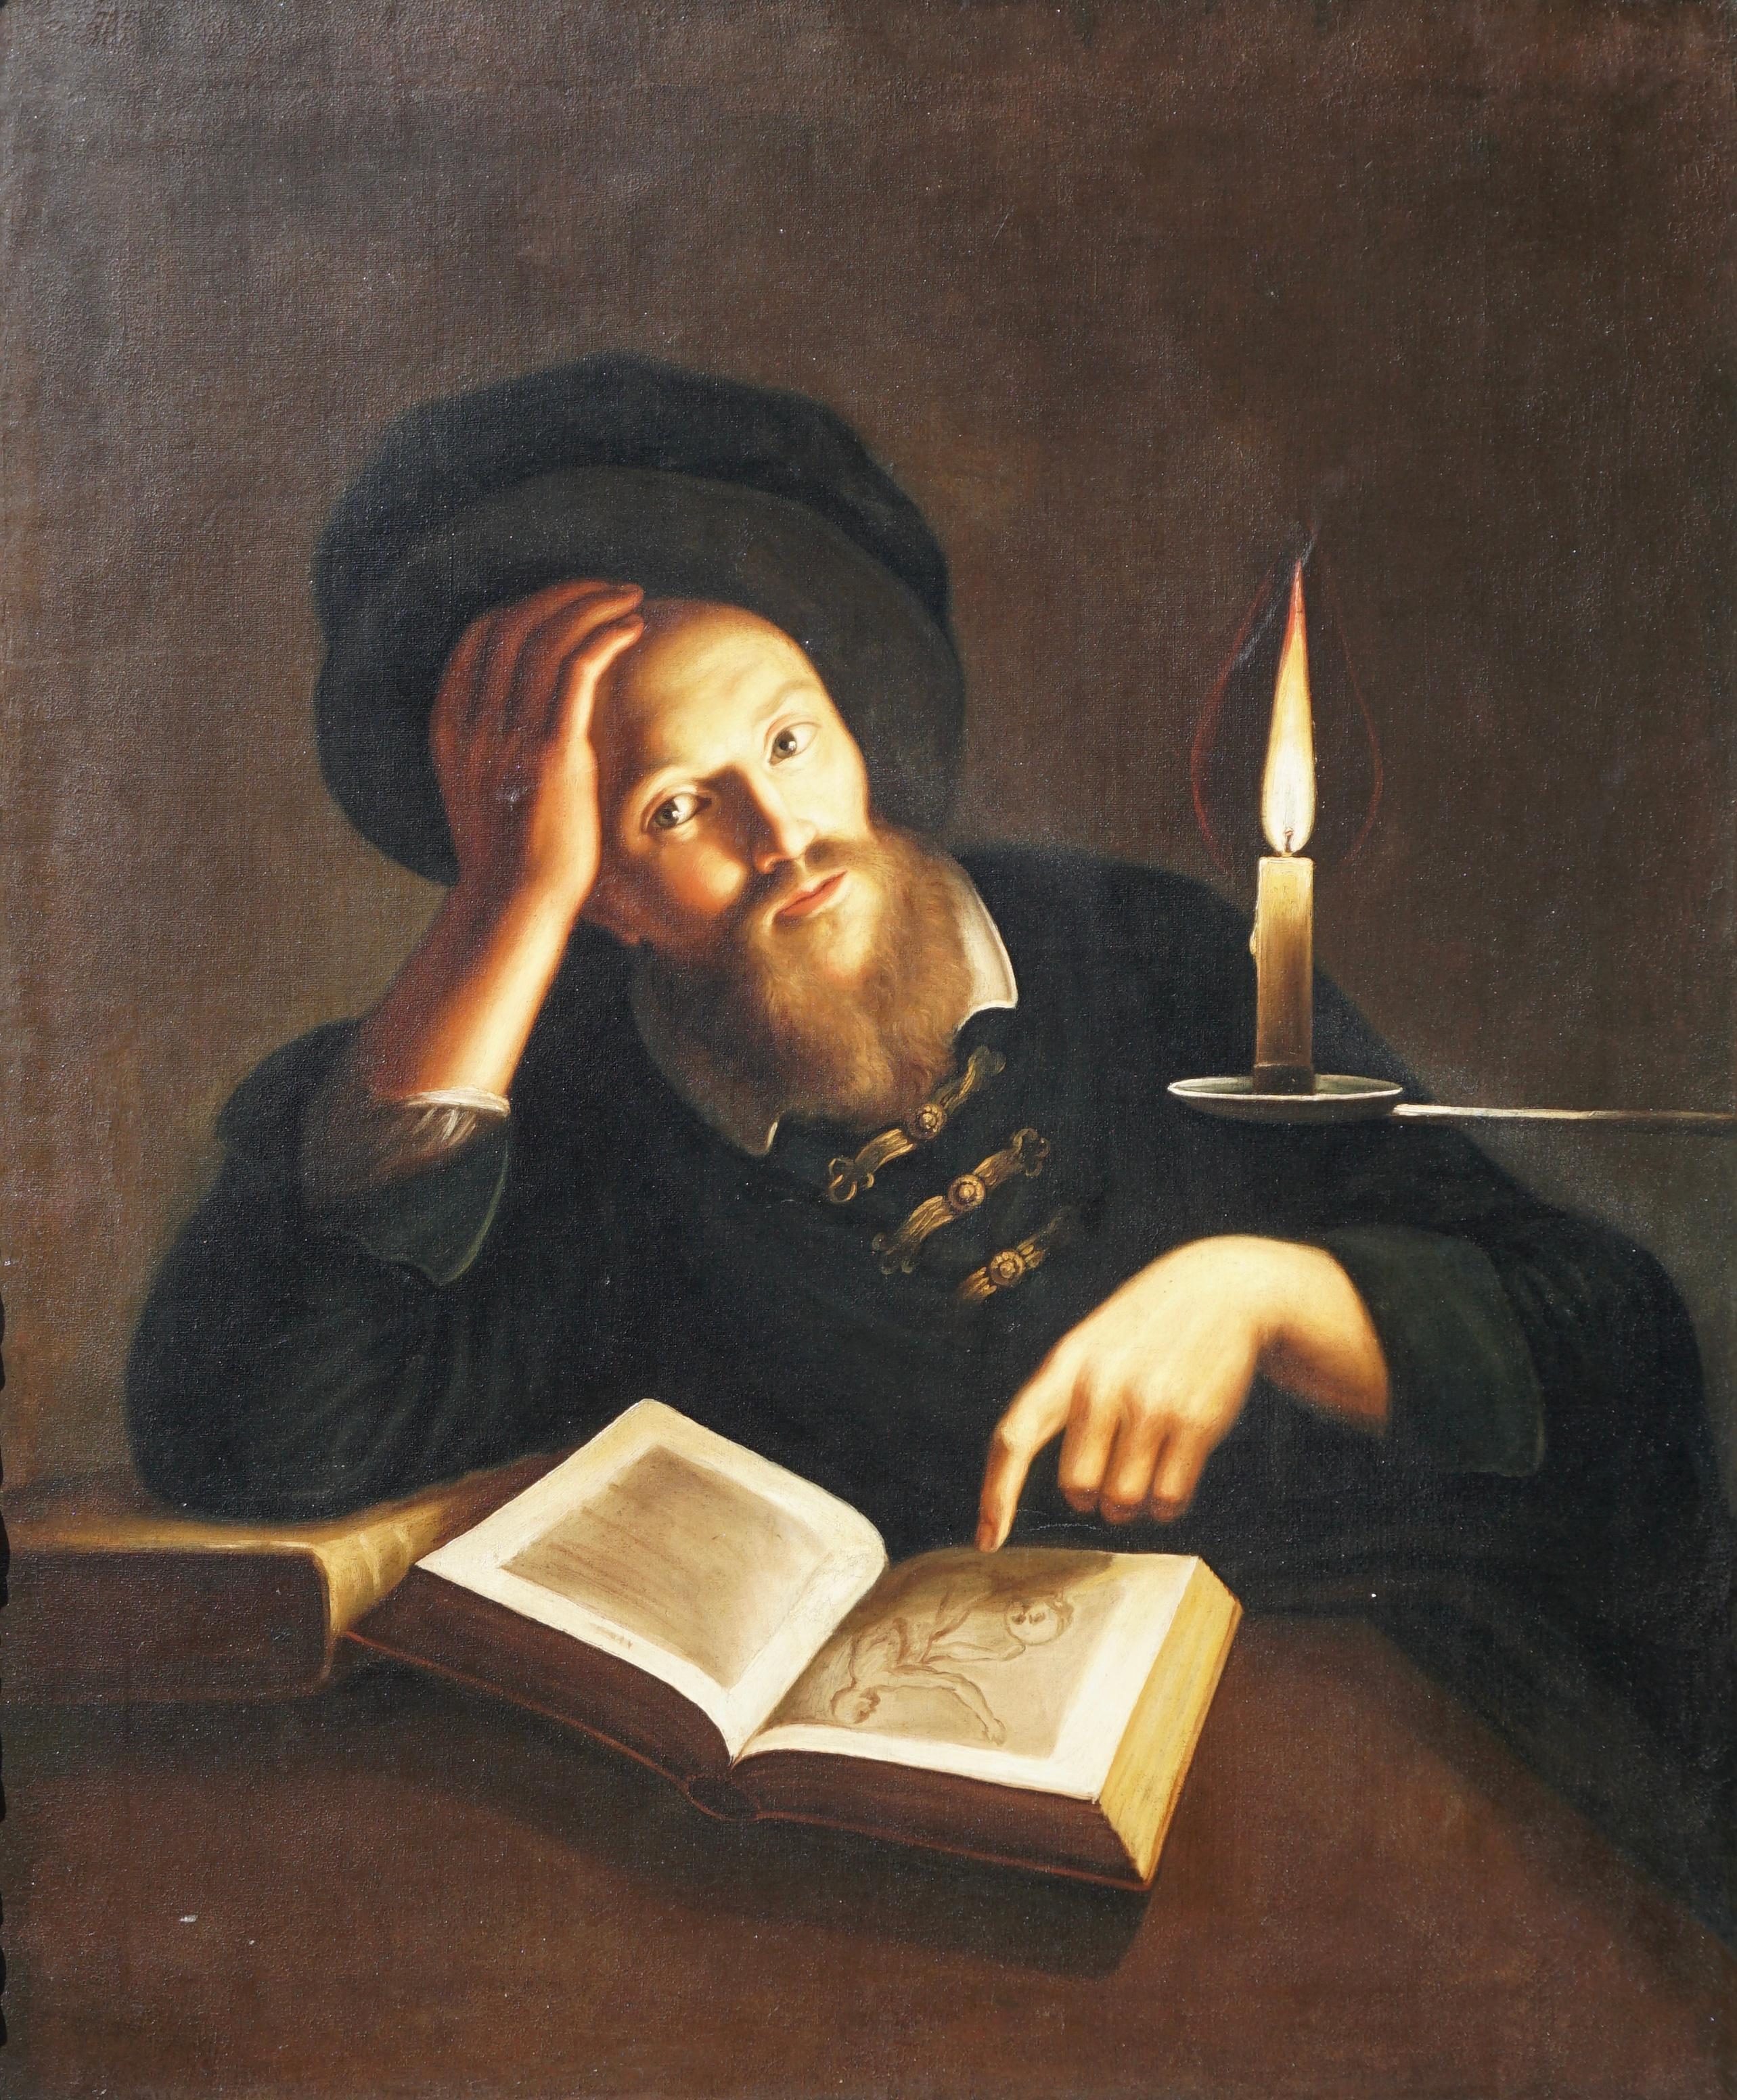 17th century self portrait of and by Trophime Bogot Pondering over an album or drawings over a table in candlelight. Considered “The Candlelight Master” 

Provenance: James Murnaghan, Dublin.

Literature: Benidect Nicolson, “Un Caravaggiste